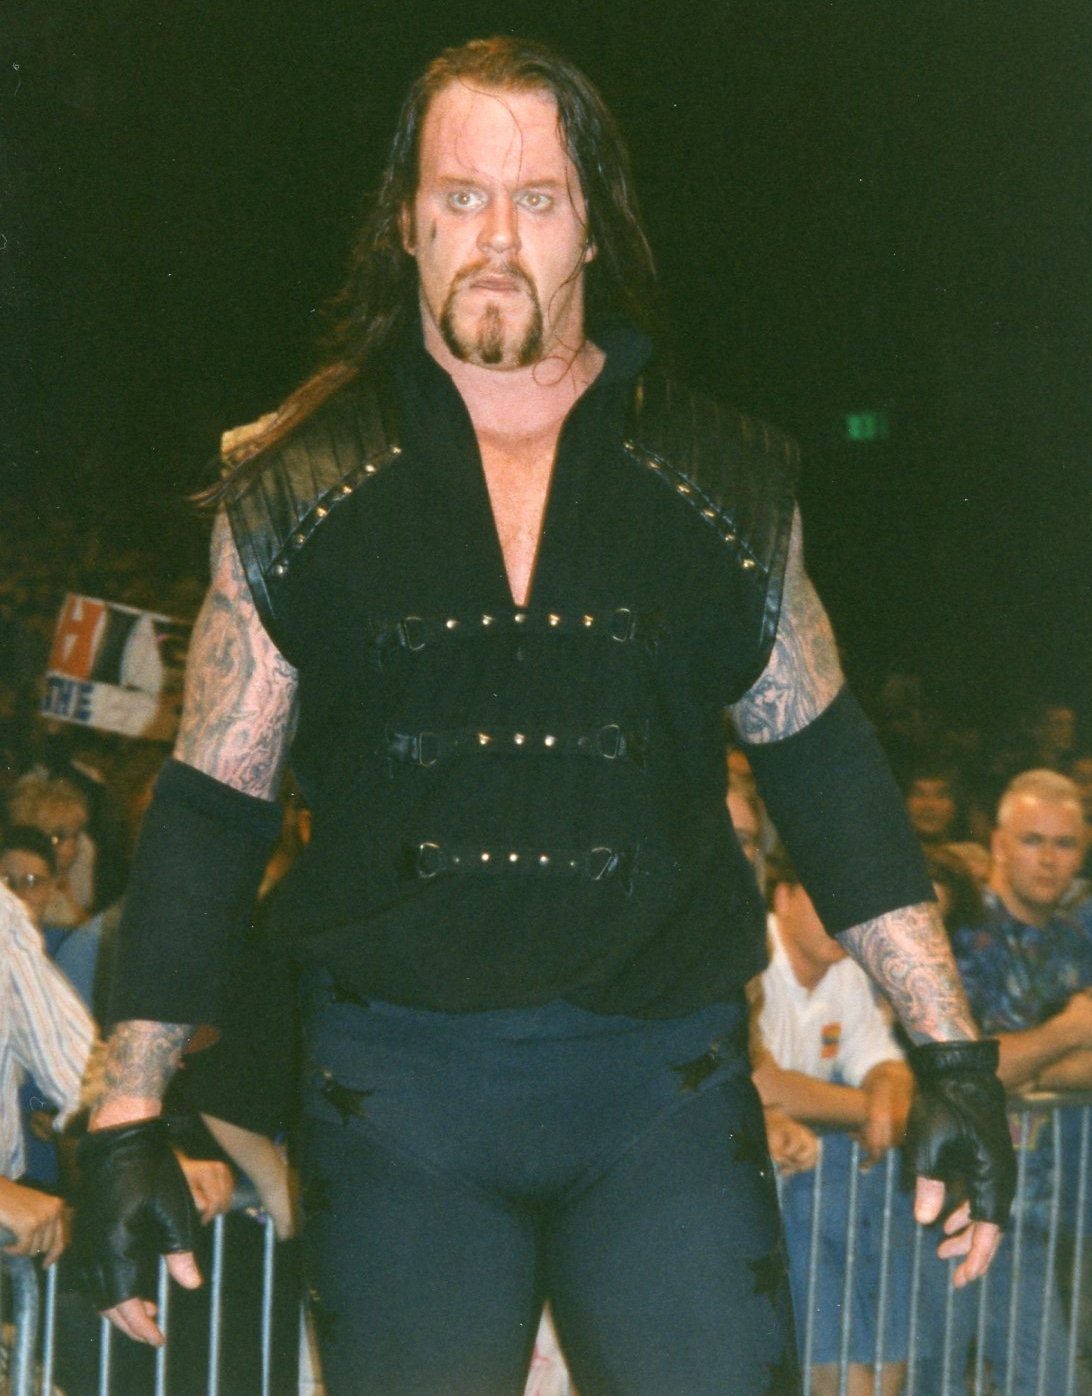 undertaker nice still computer download images free hd background